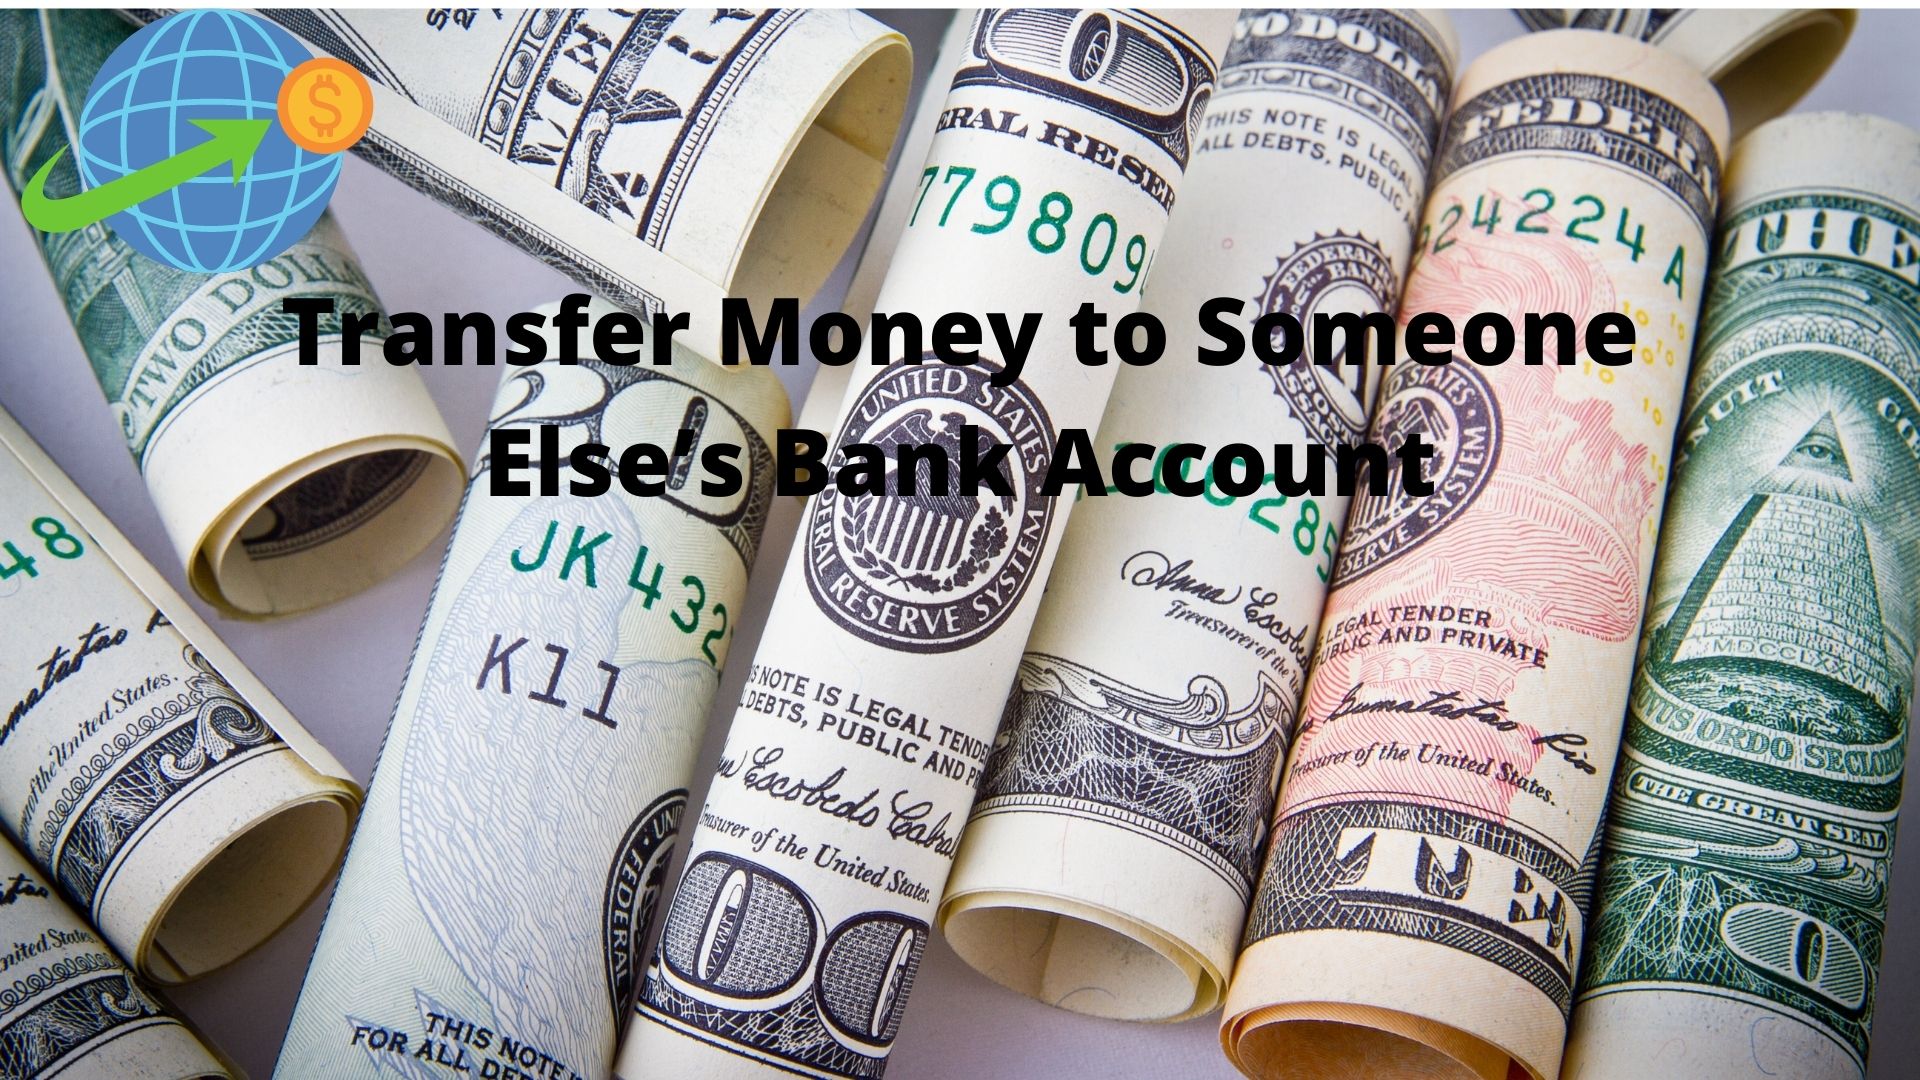 How To Transfer Money to Someone Else’s Bank Account